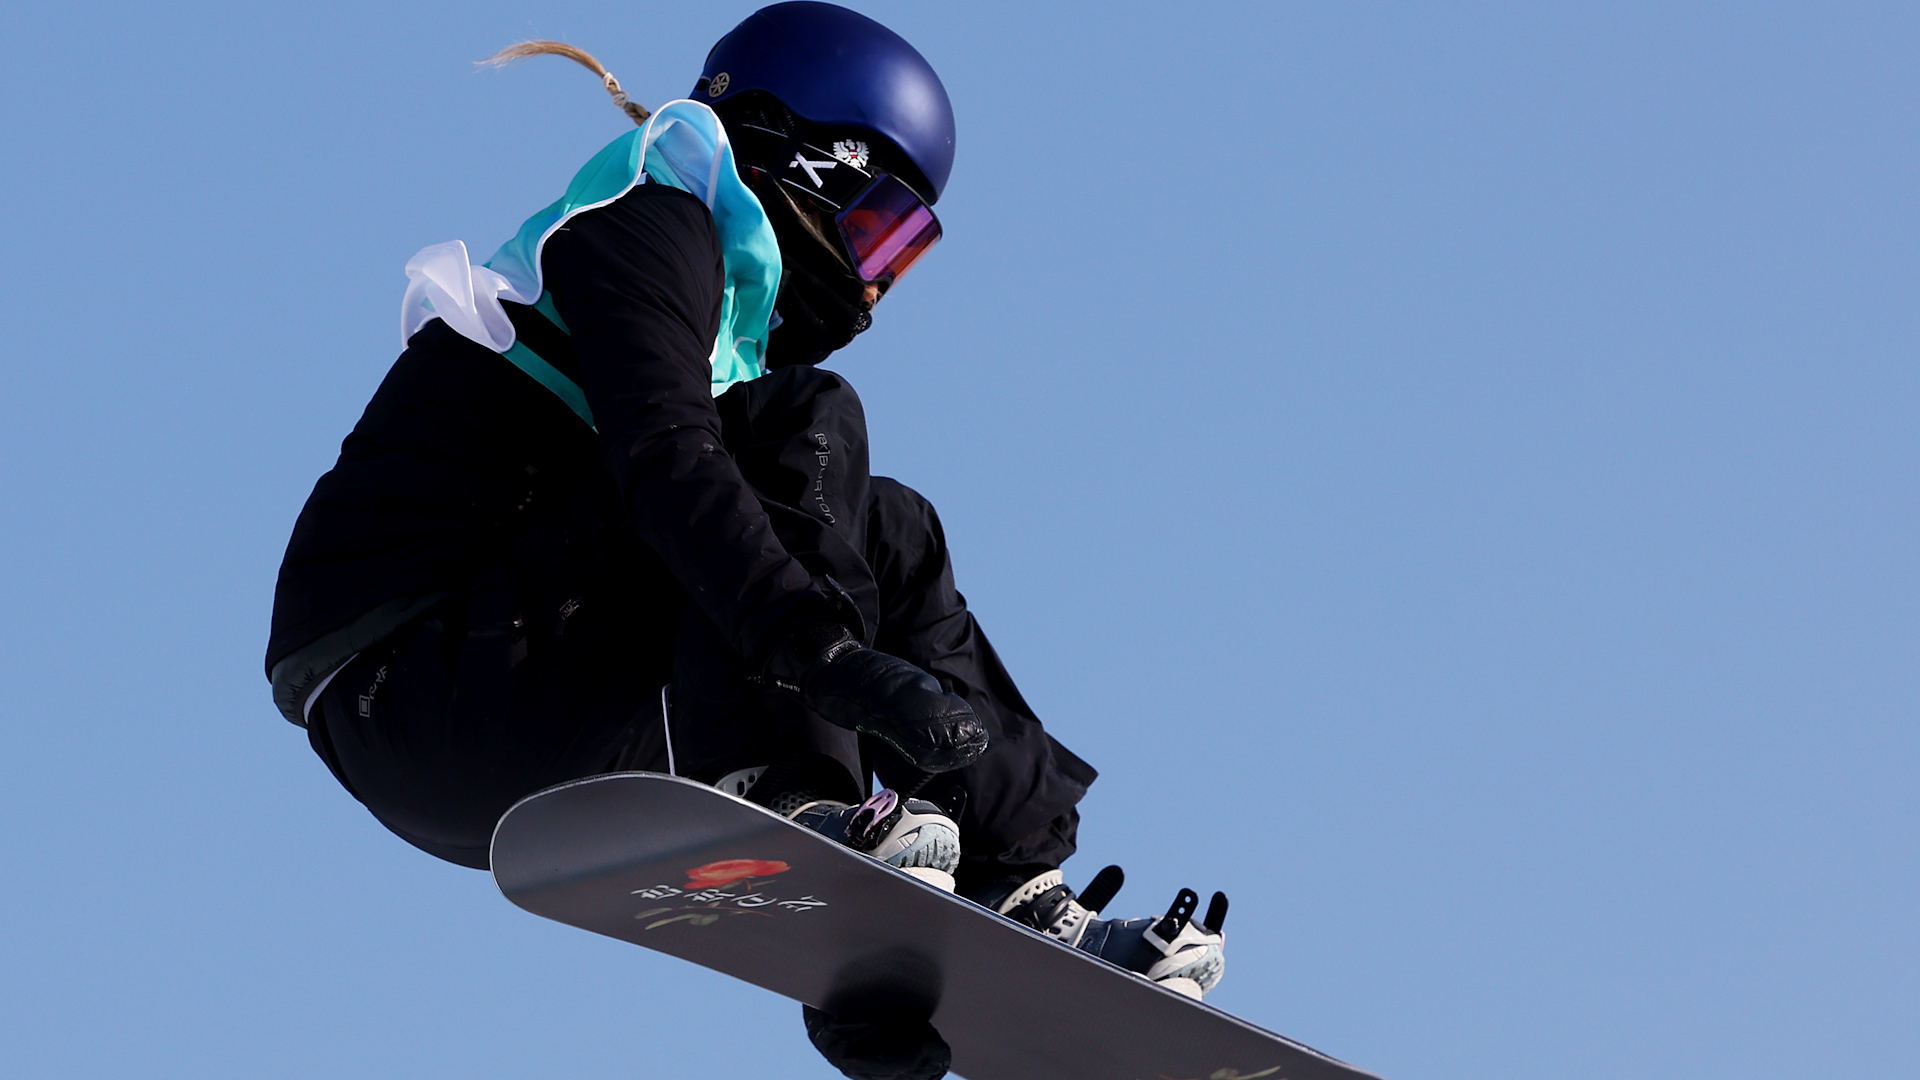 Austrias Anna Gasser Defends Olympic Title With Gold in Snowboard Big Air, USAs Hailey Langland Finishes 12th